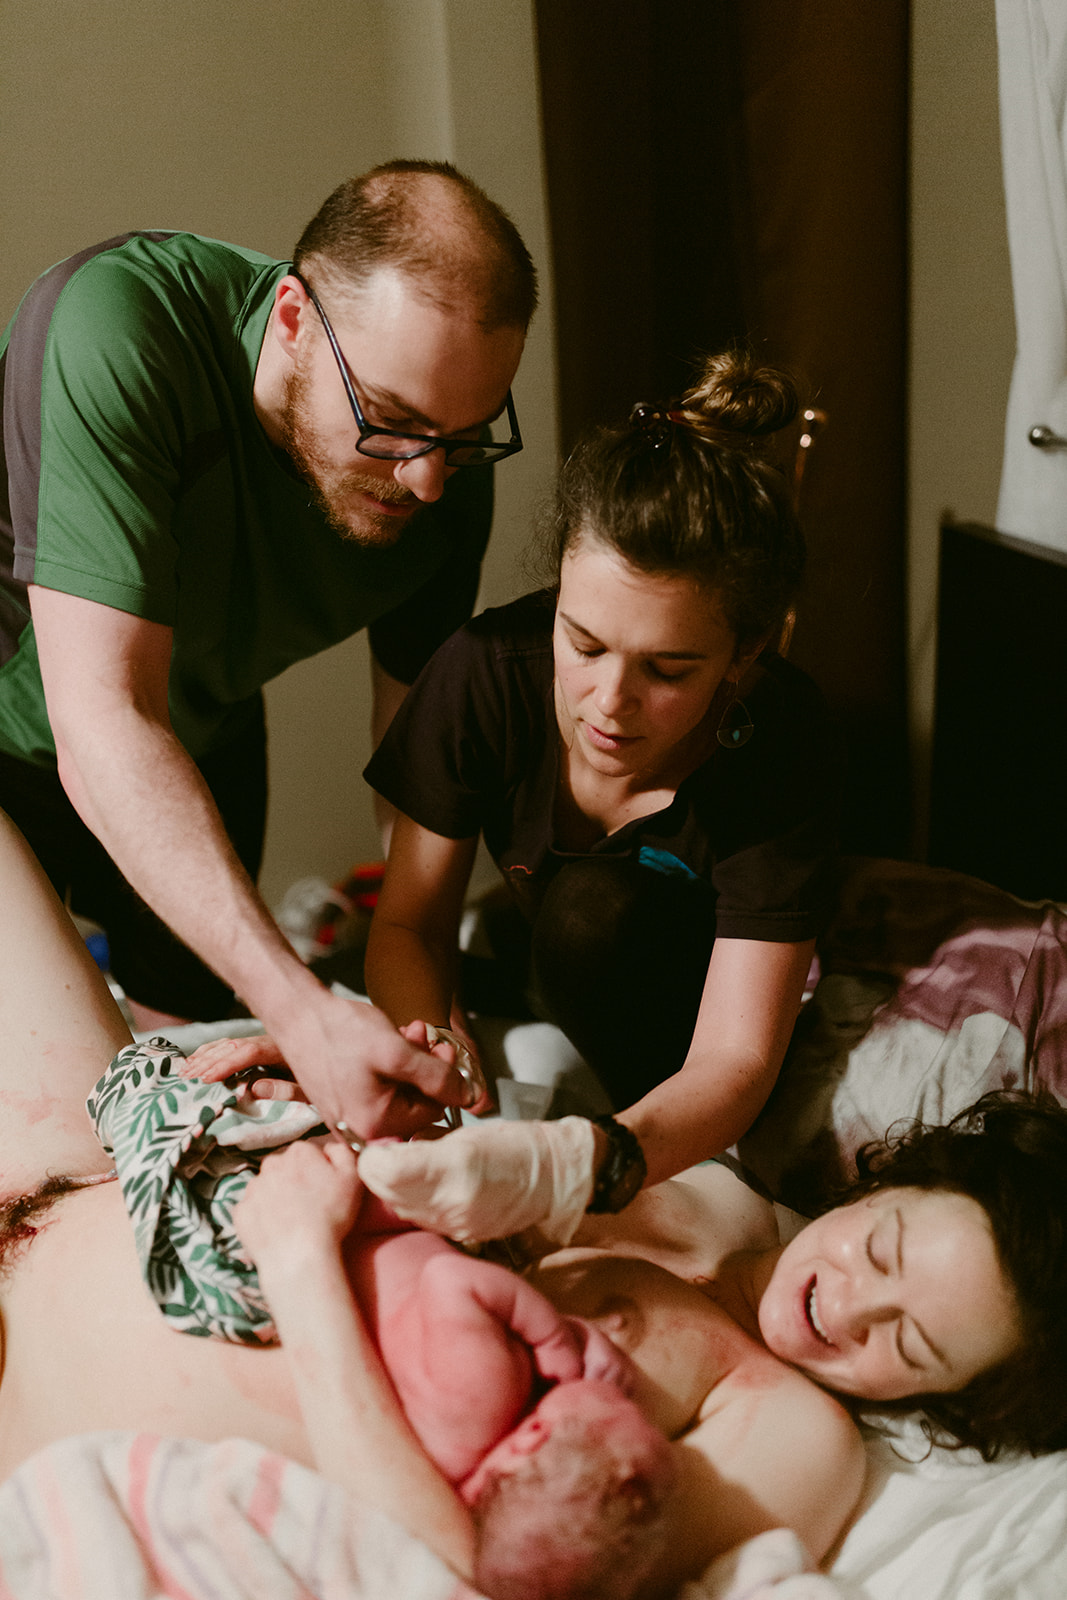 Midwife Lucy French assists a father to cut his newborn baby's umbilical cord at a home birth.